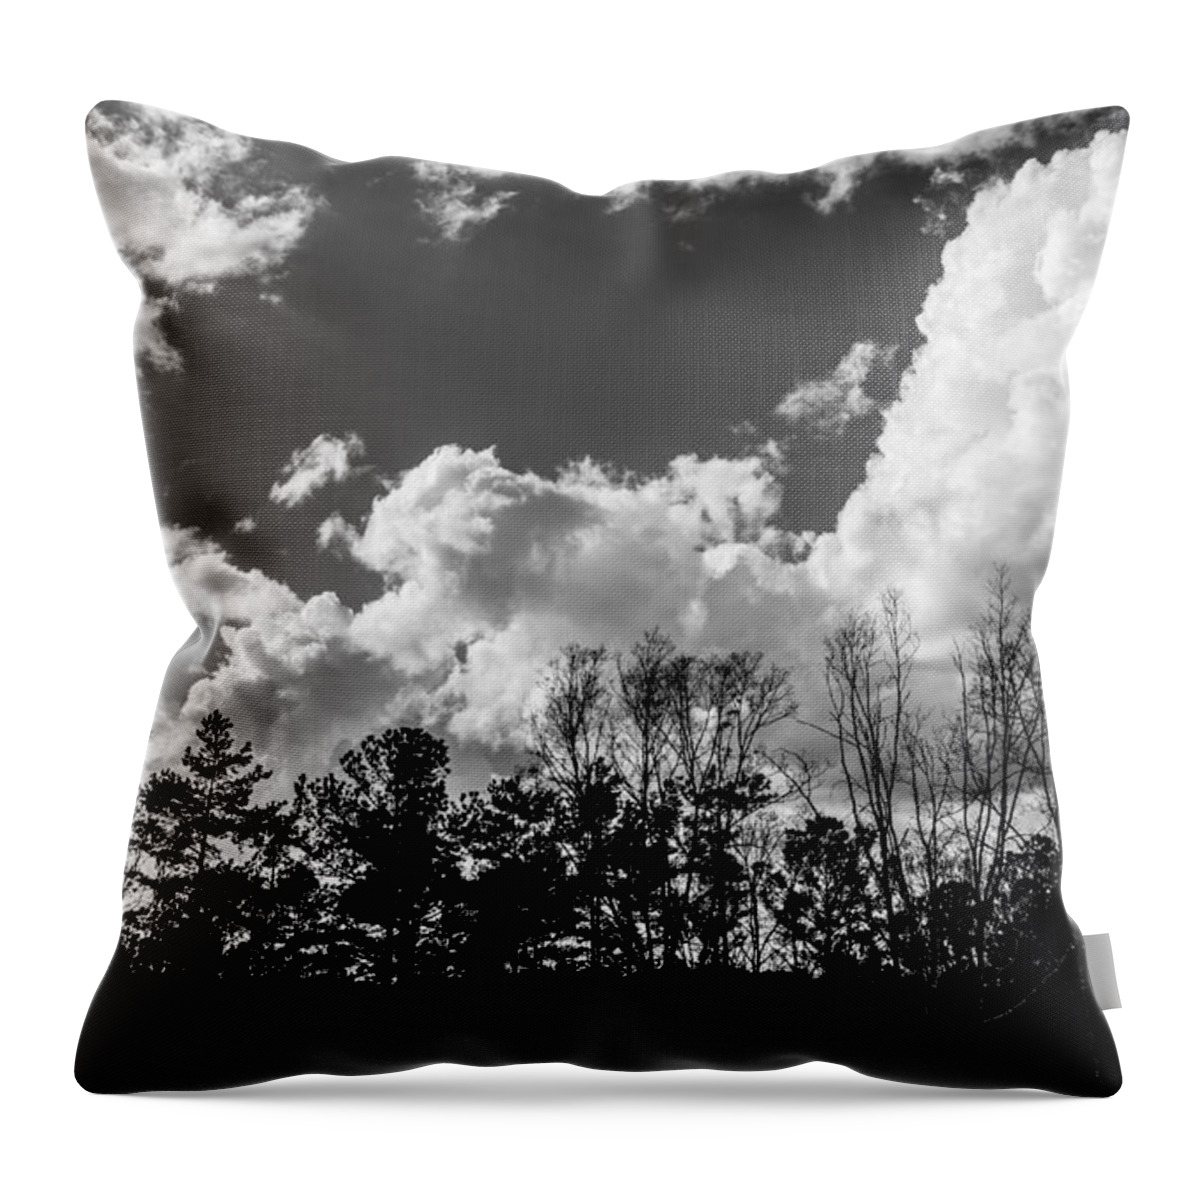 Dark Clouds Throw Pillow featuring the photograph Clouds by James L Bartlett